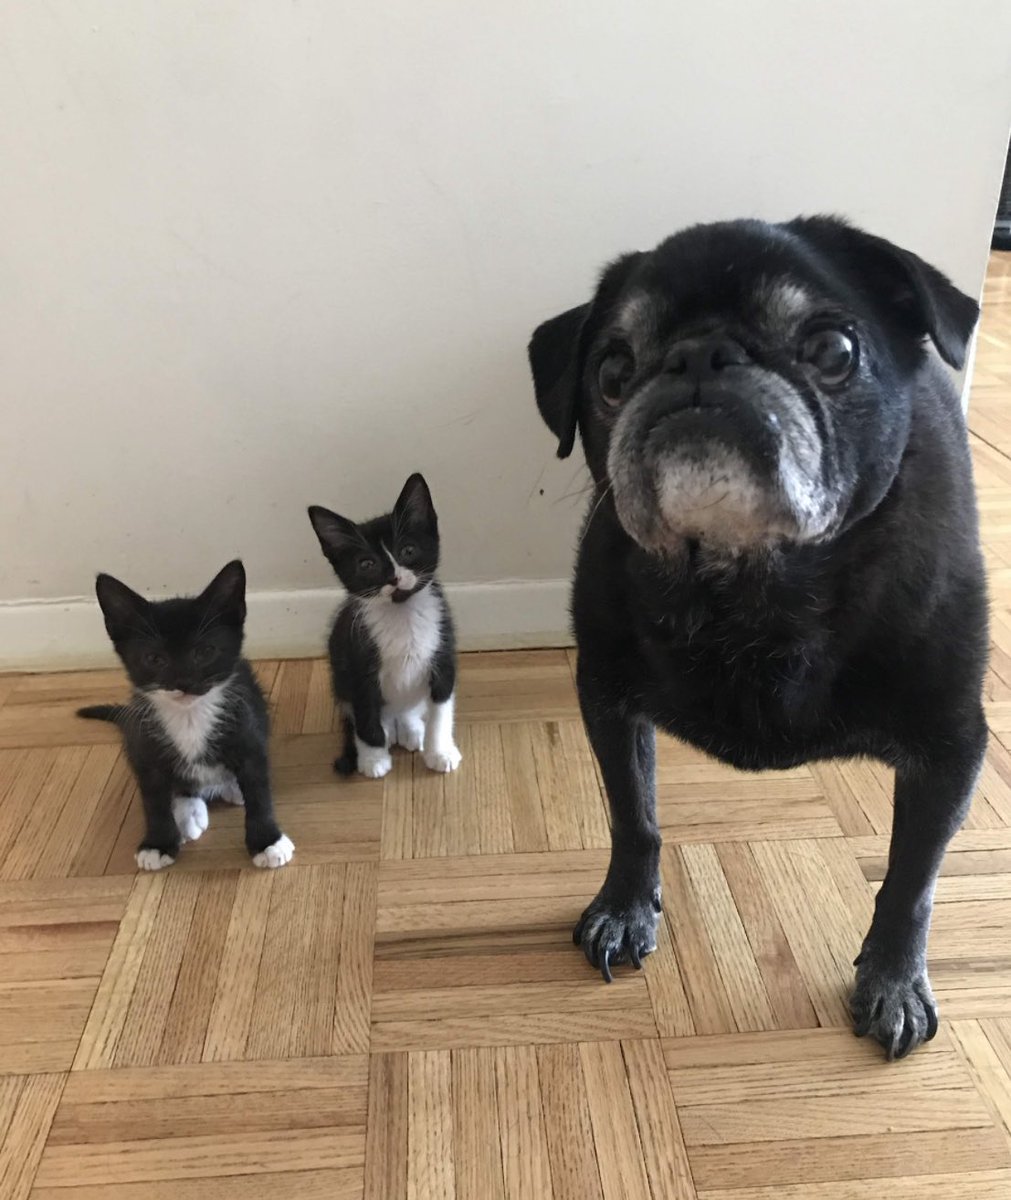 A2 hamilton told the foster kittens he had to taste their food #pugchat